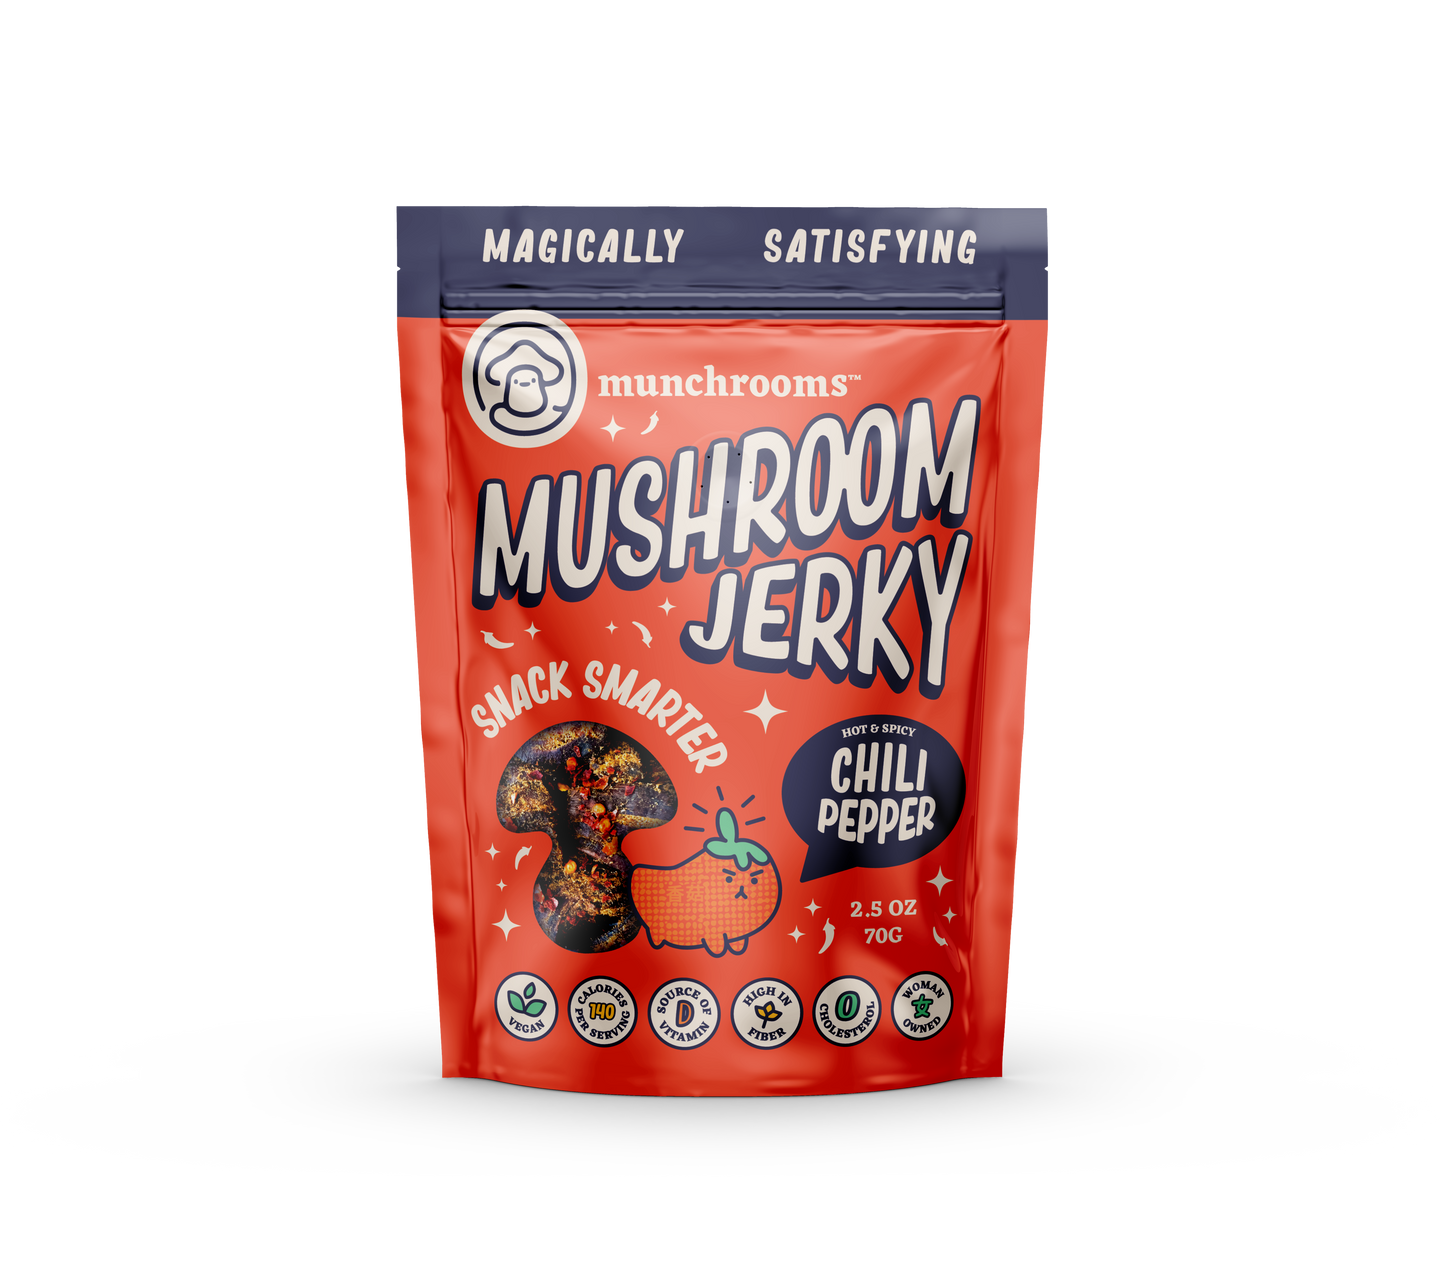 Hot + Spicy Chili Pepper Mushroom Jerky by munchrooms